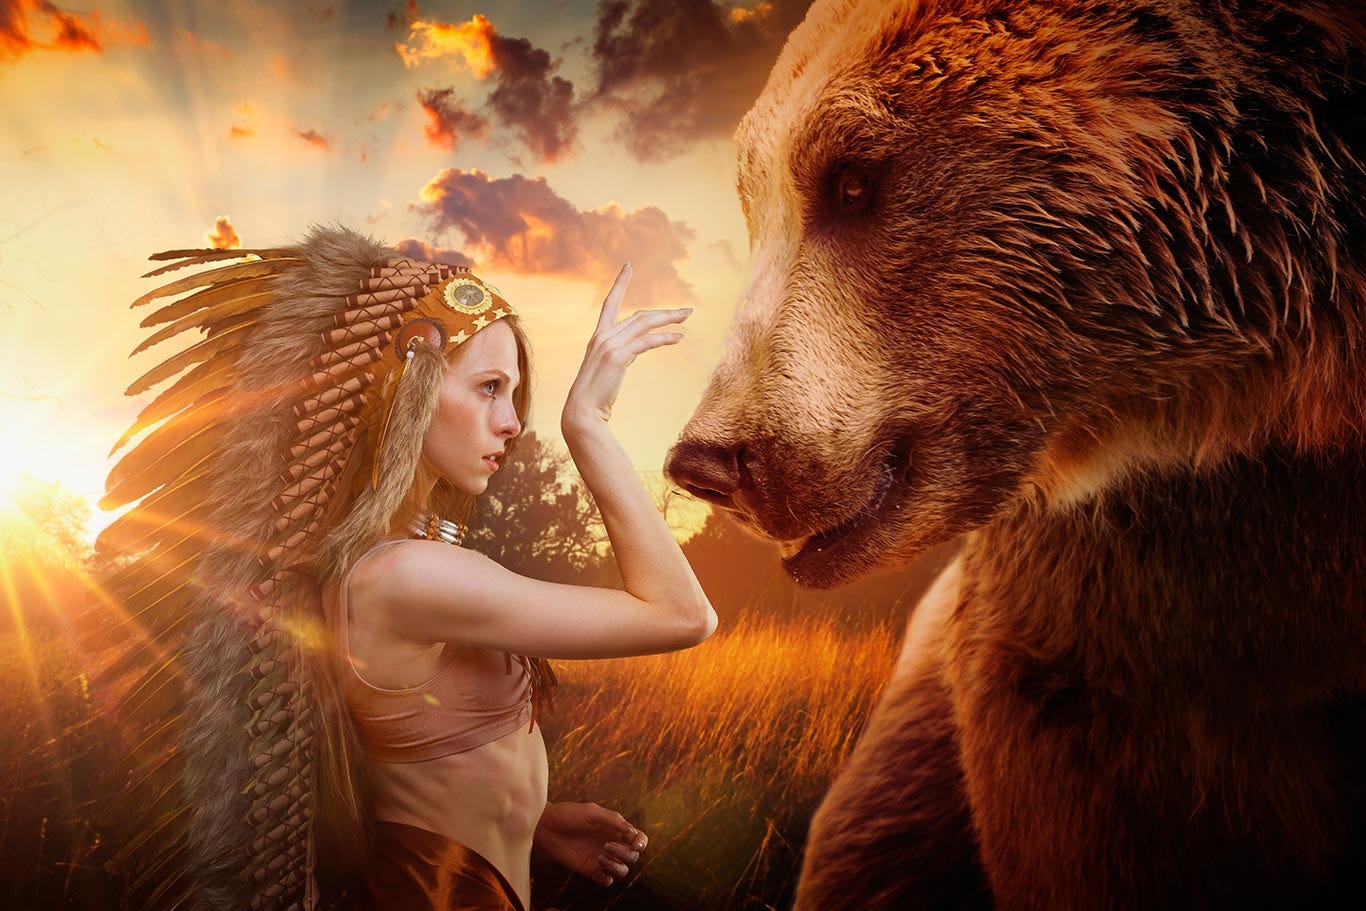 Fantasy image of a white woman dressed as a Native American touching a bear